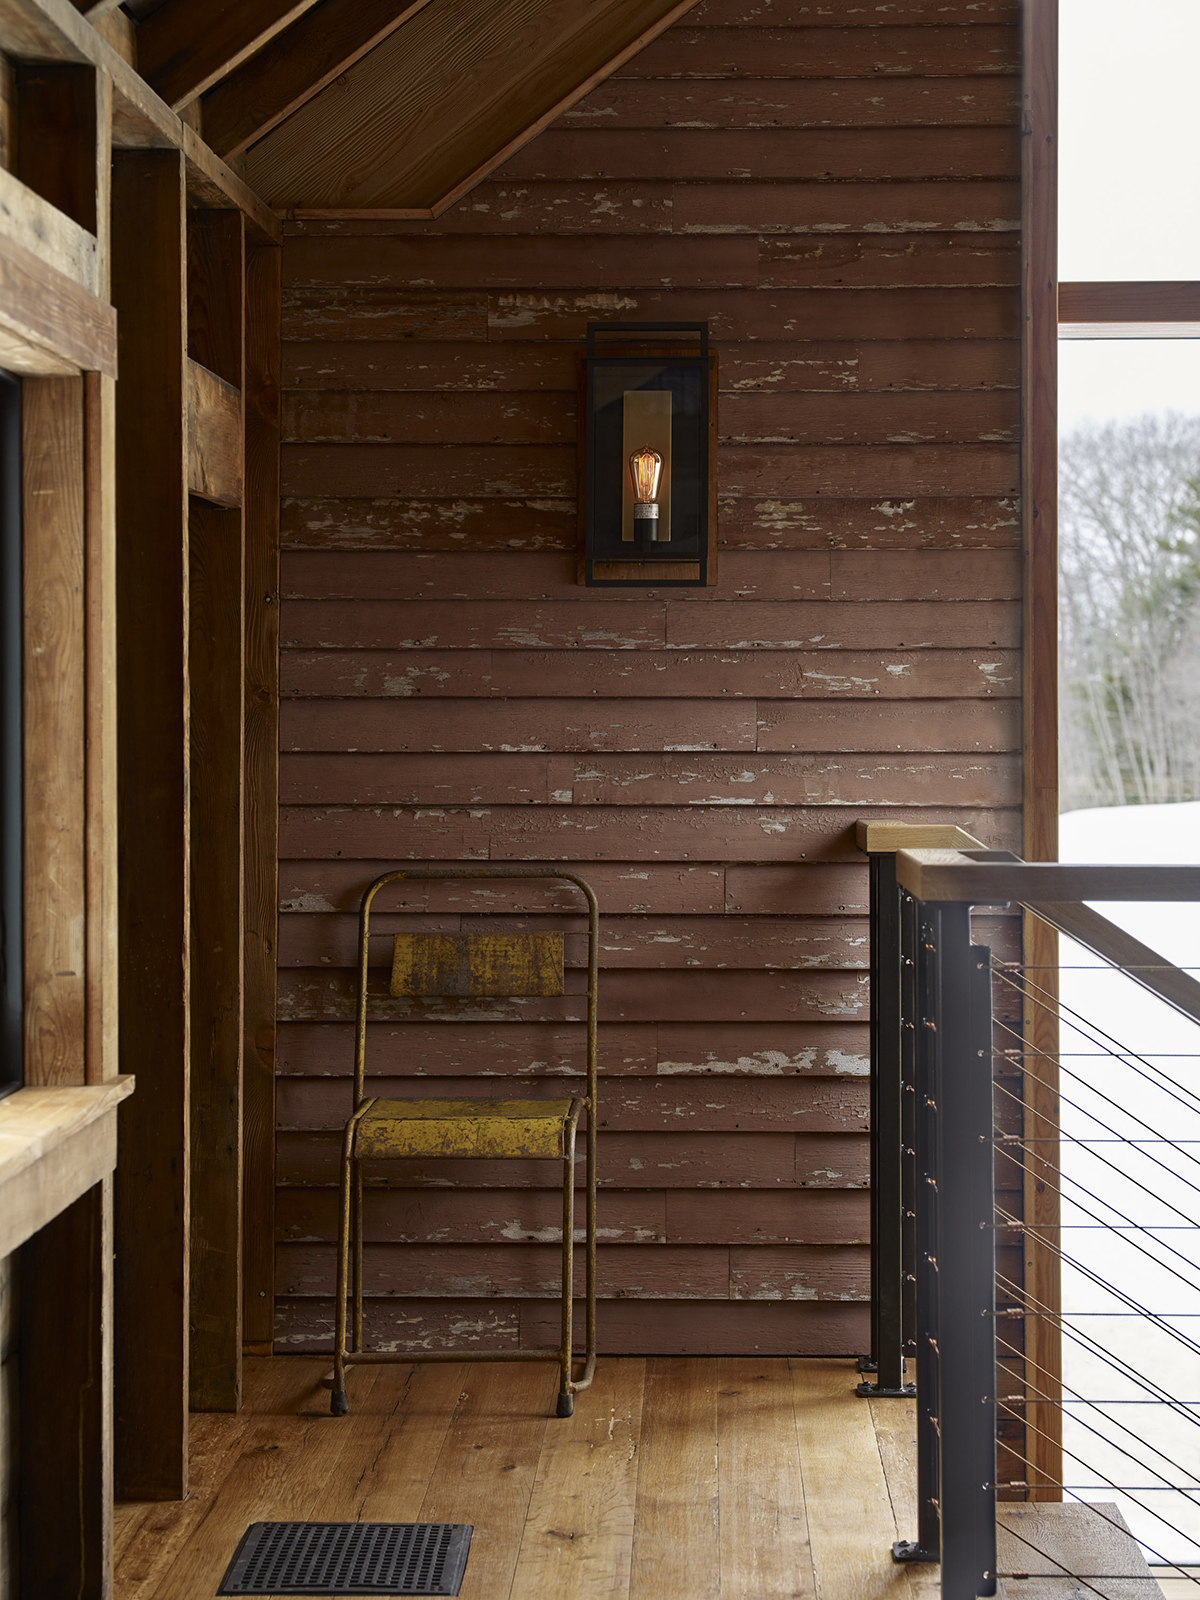 Rustic, cozy, and loved combine to create the atmosphere atop the stairs